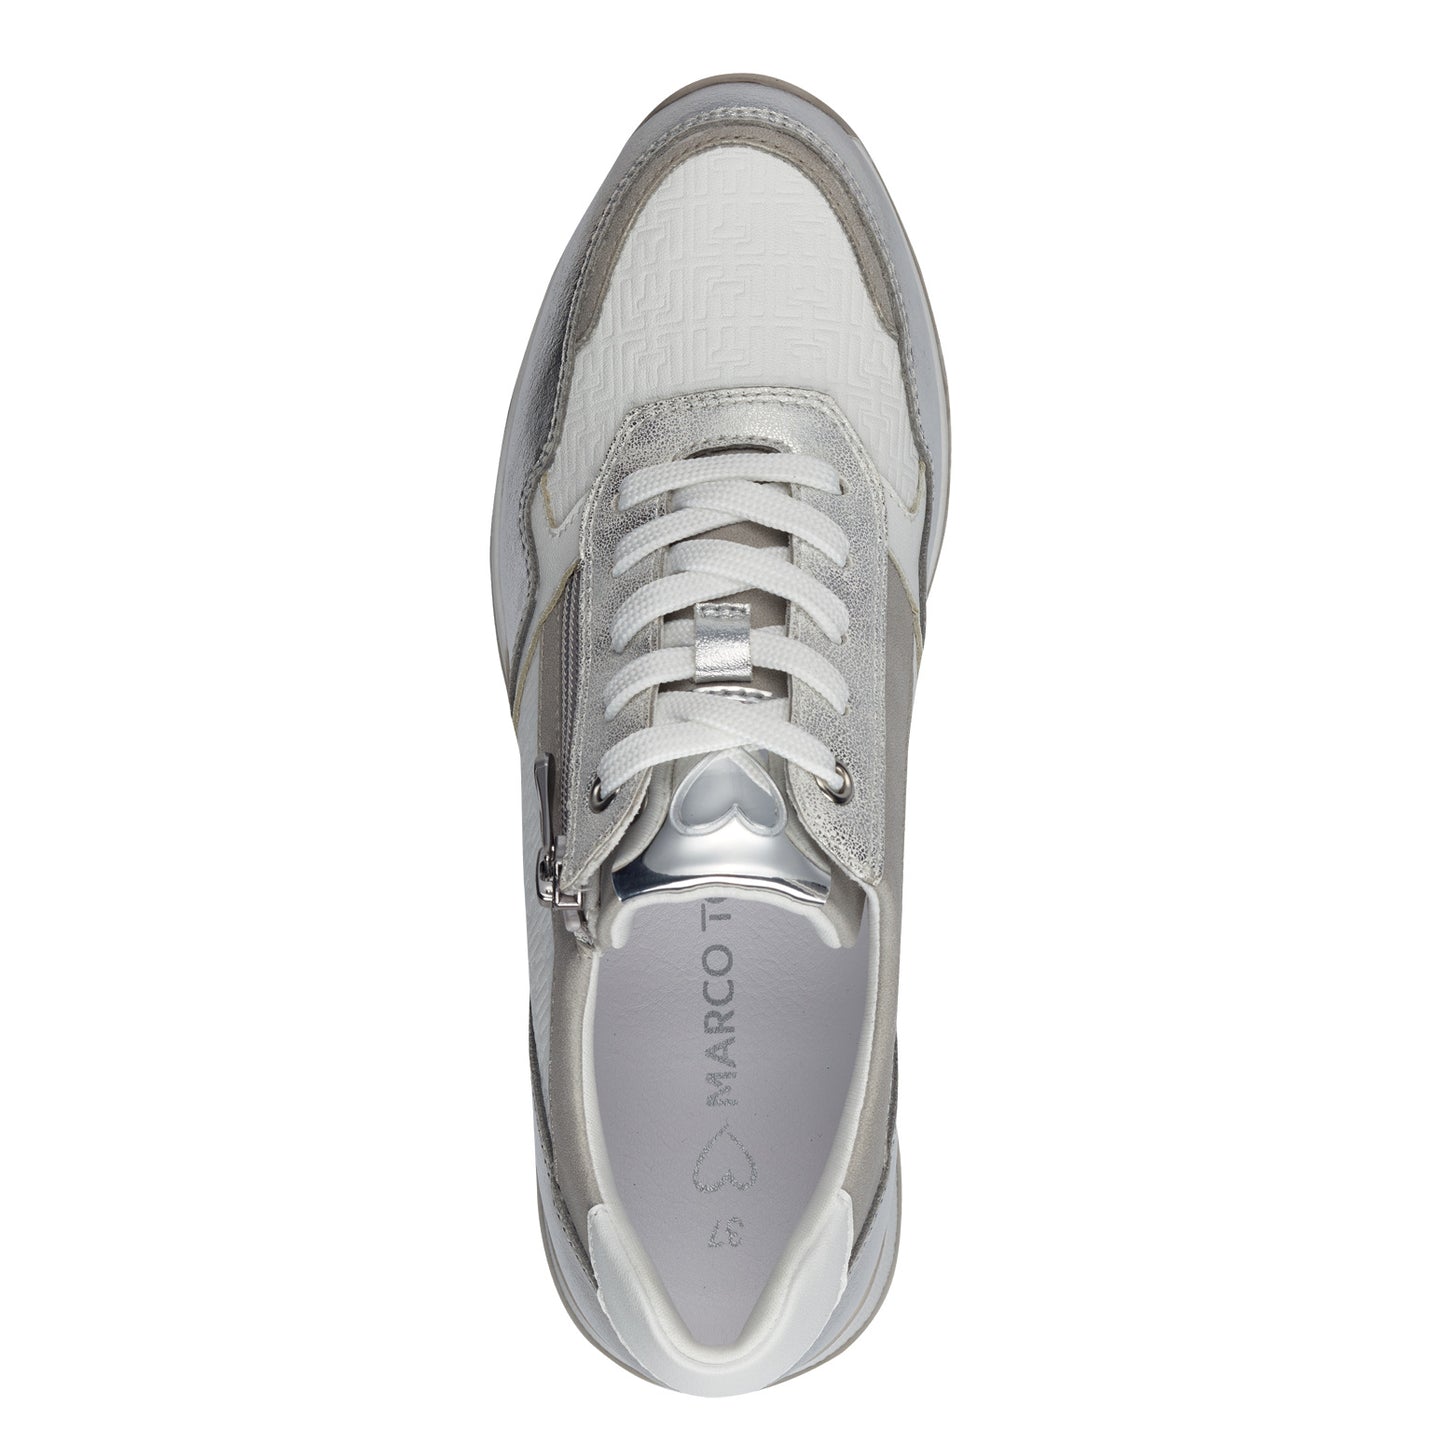 Marco Tozzi - Ladies Shoes Trainers White, Silver (2395)